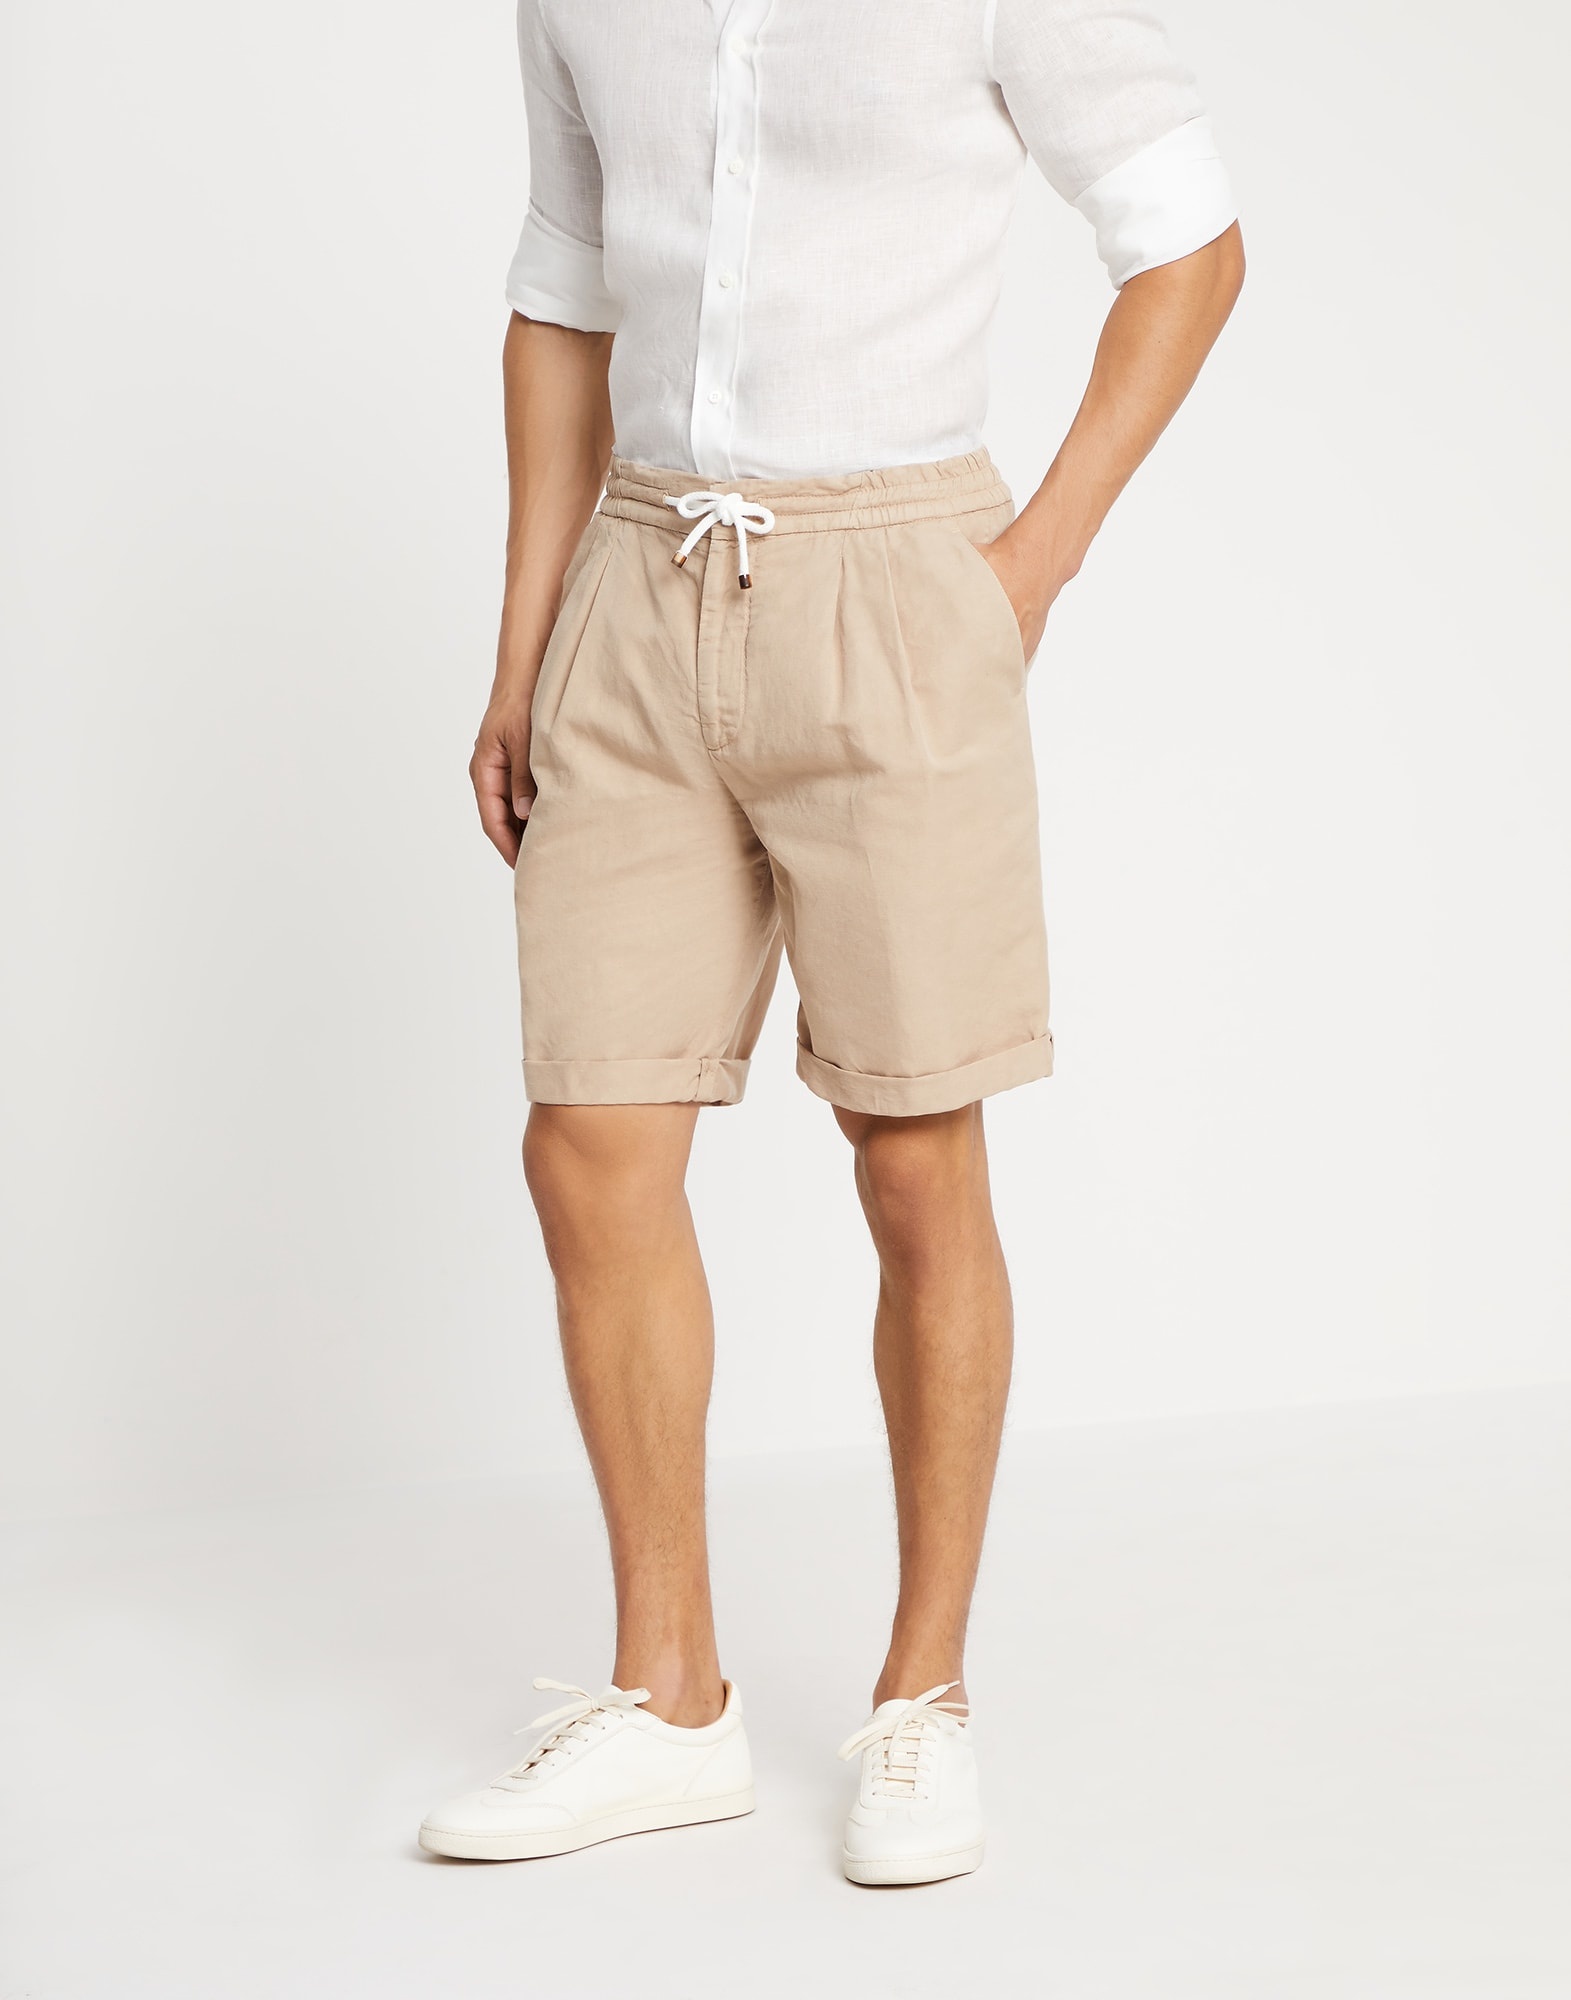 Garment-dyed Bermuda shorts in twisted linen and cotton gabardine with drawstring and double pleats - 1